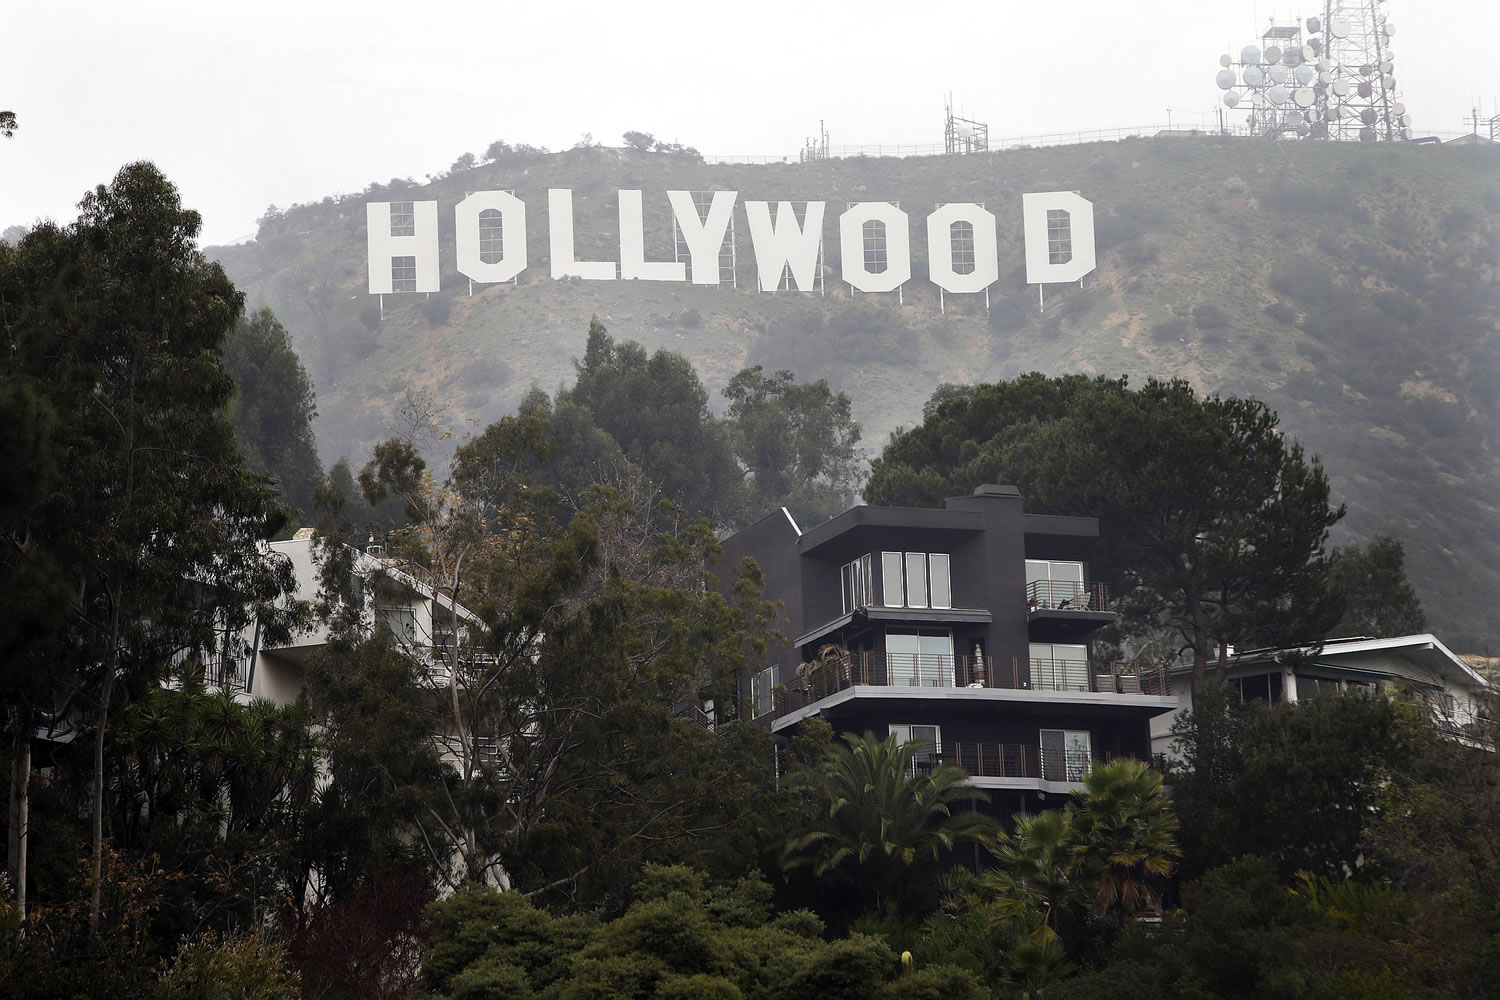 Homes sit on the hillside near the Hollywood Sign, Tuesday, Jan. 20, 2015, in Los Angeles. Hollywood Sign Seekers can't just take a bus or join a tour group to get there. Arriving at the landmark sign that towers magnificently over Los Angeles' skyline requires traipsing through a densely populated hillside neighborhood of 20,000 people and numerous multimillion-dollar homes located on steep, narrow, almost impassable streets. (AP Photo/Jae C.